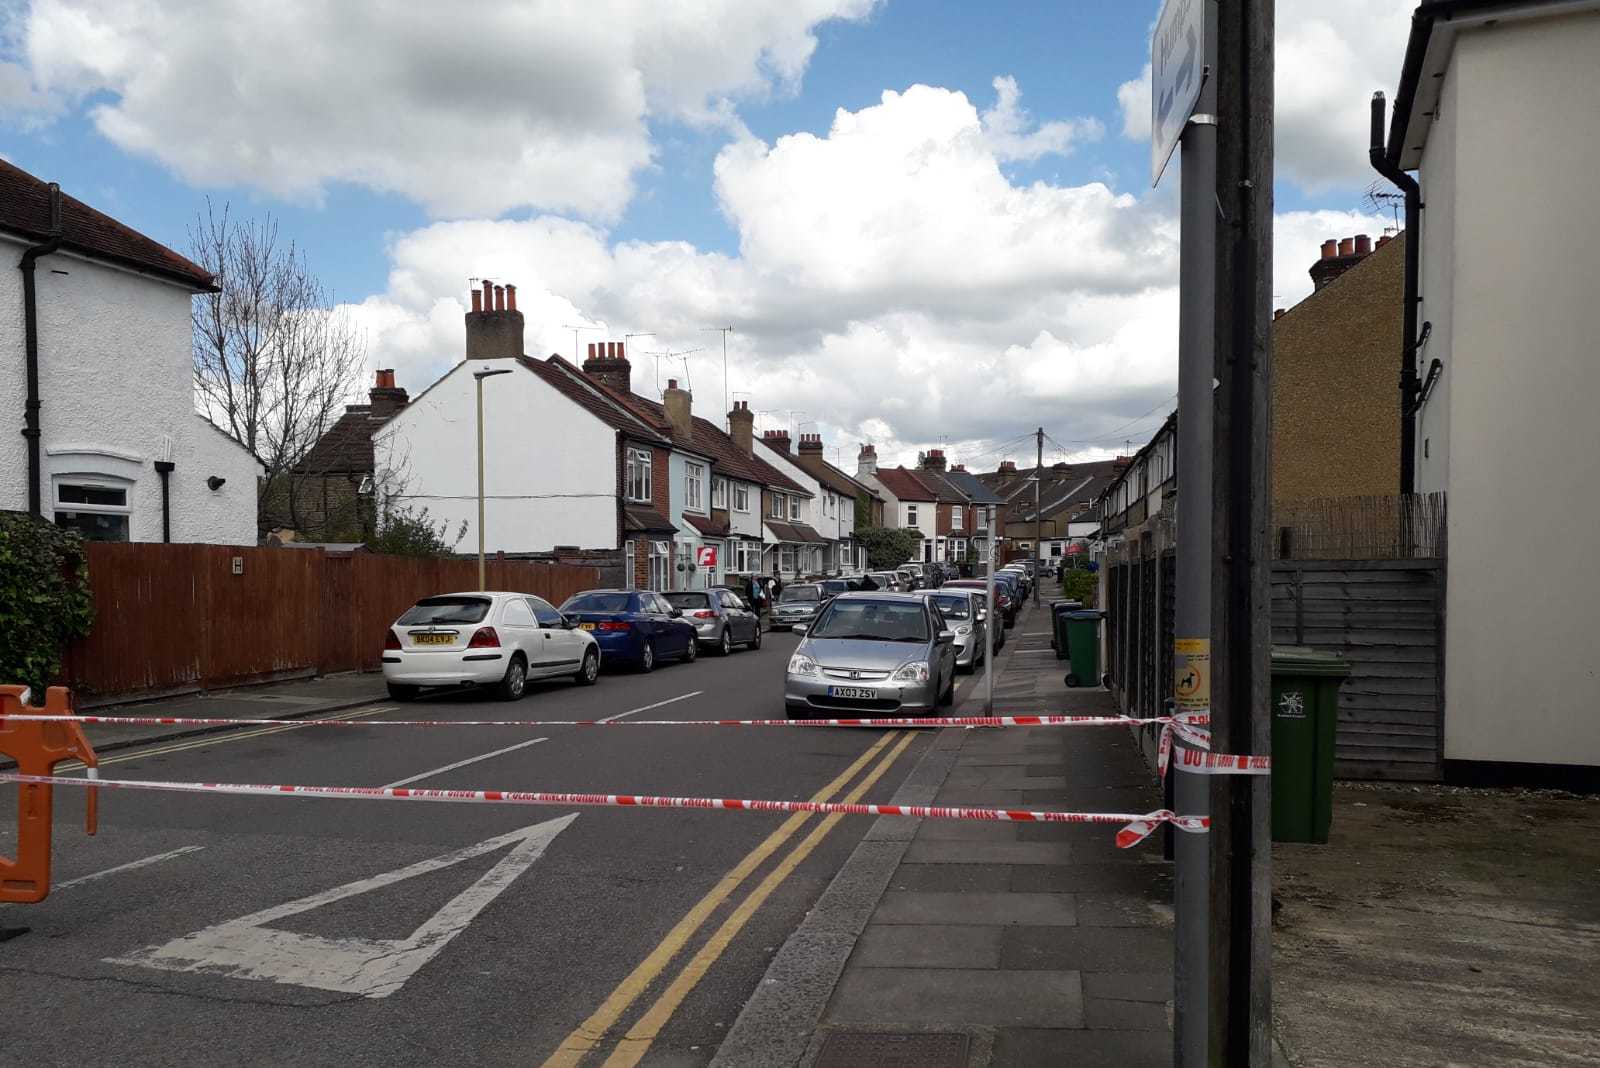 Police cordon in place in Watford street